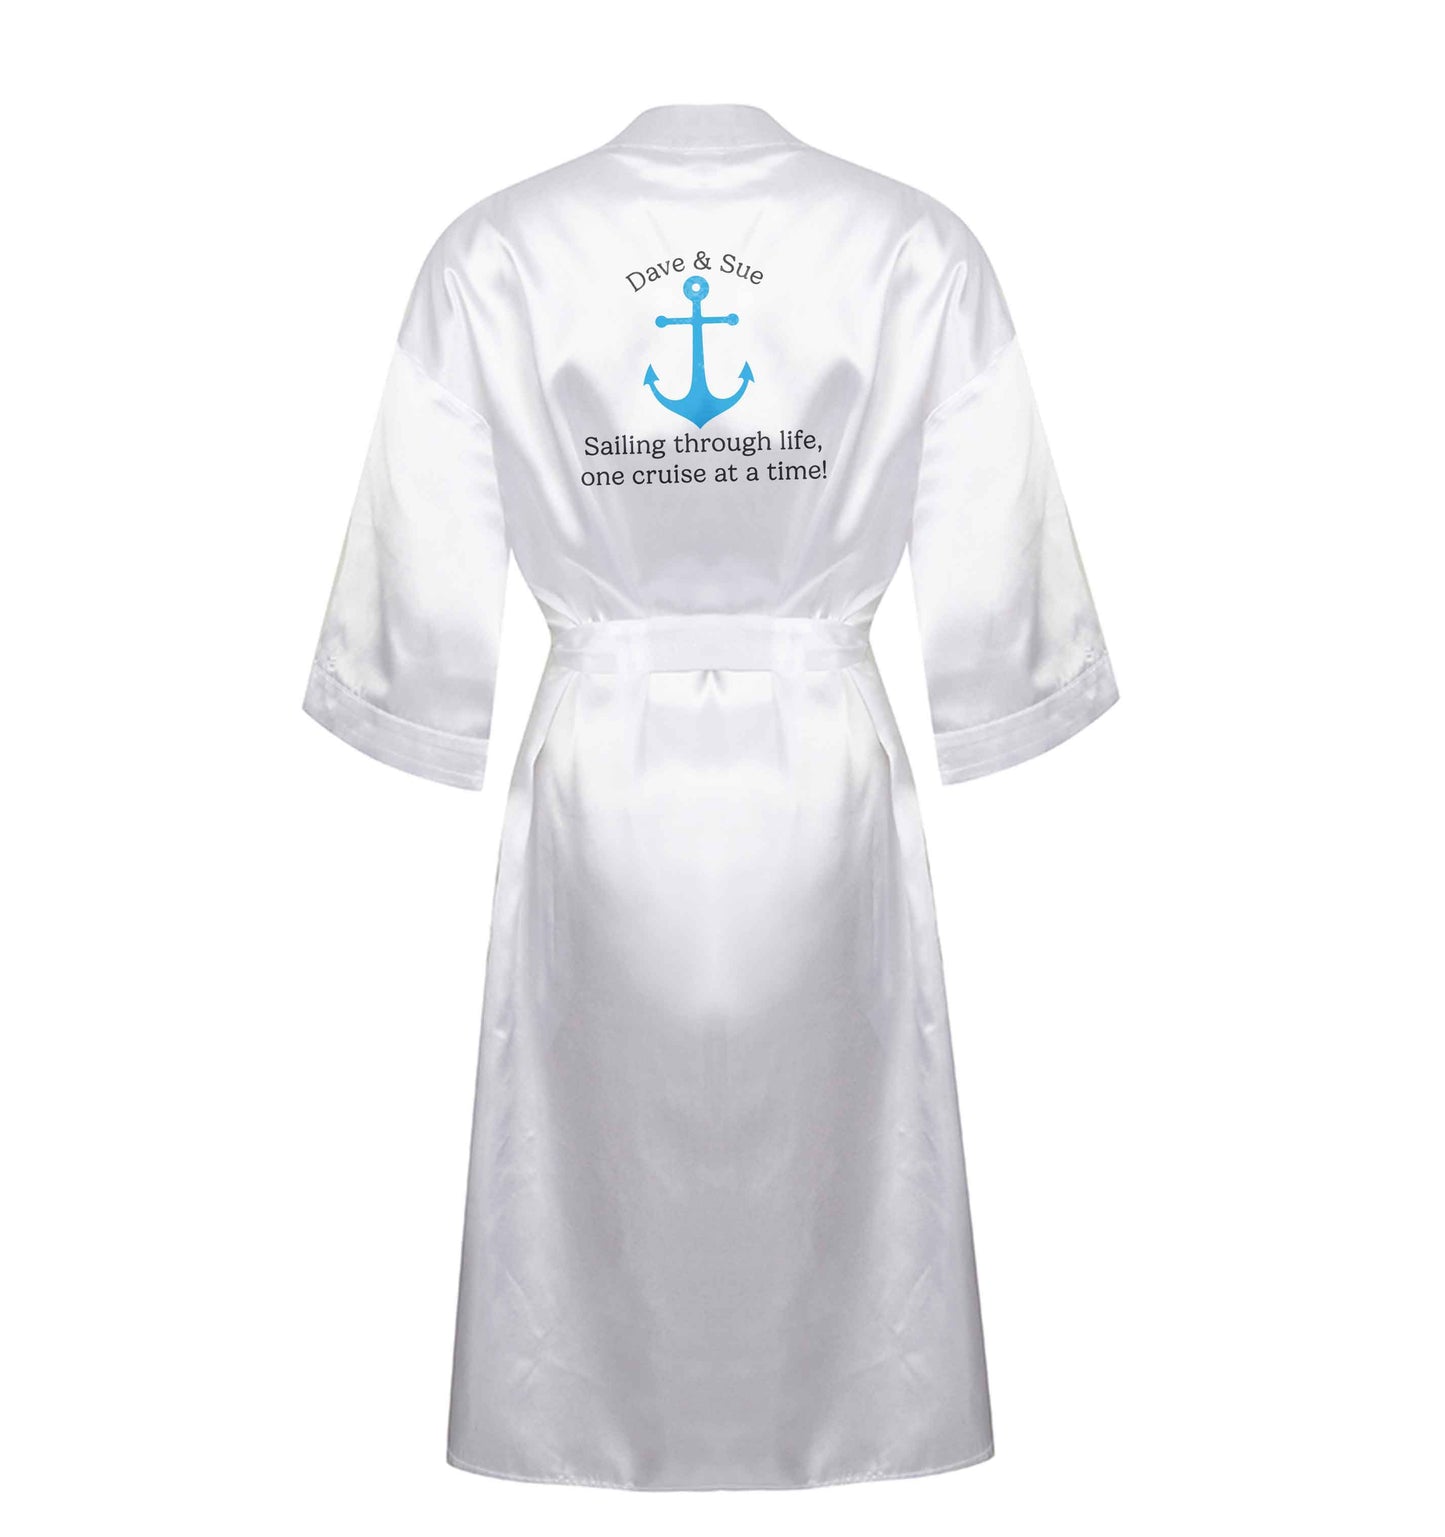 Sailing through life one cruise at a time - personalised XL/XXL white ladies dressing gown size 16/18